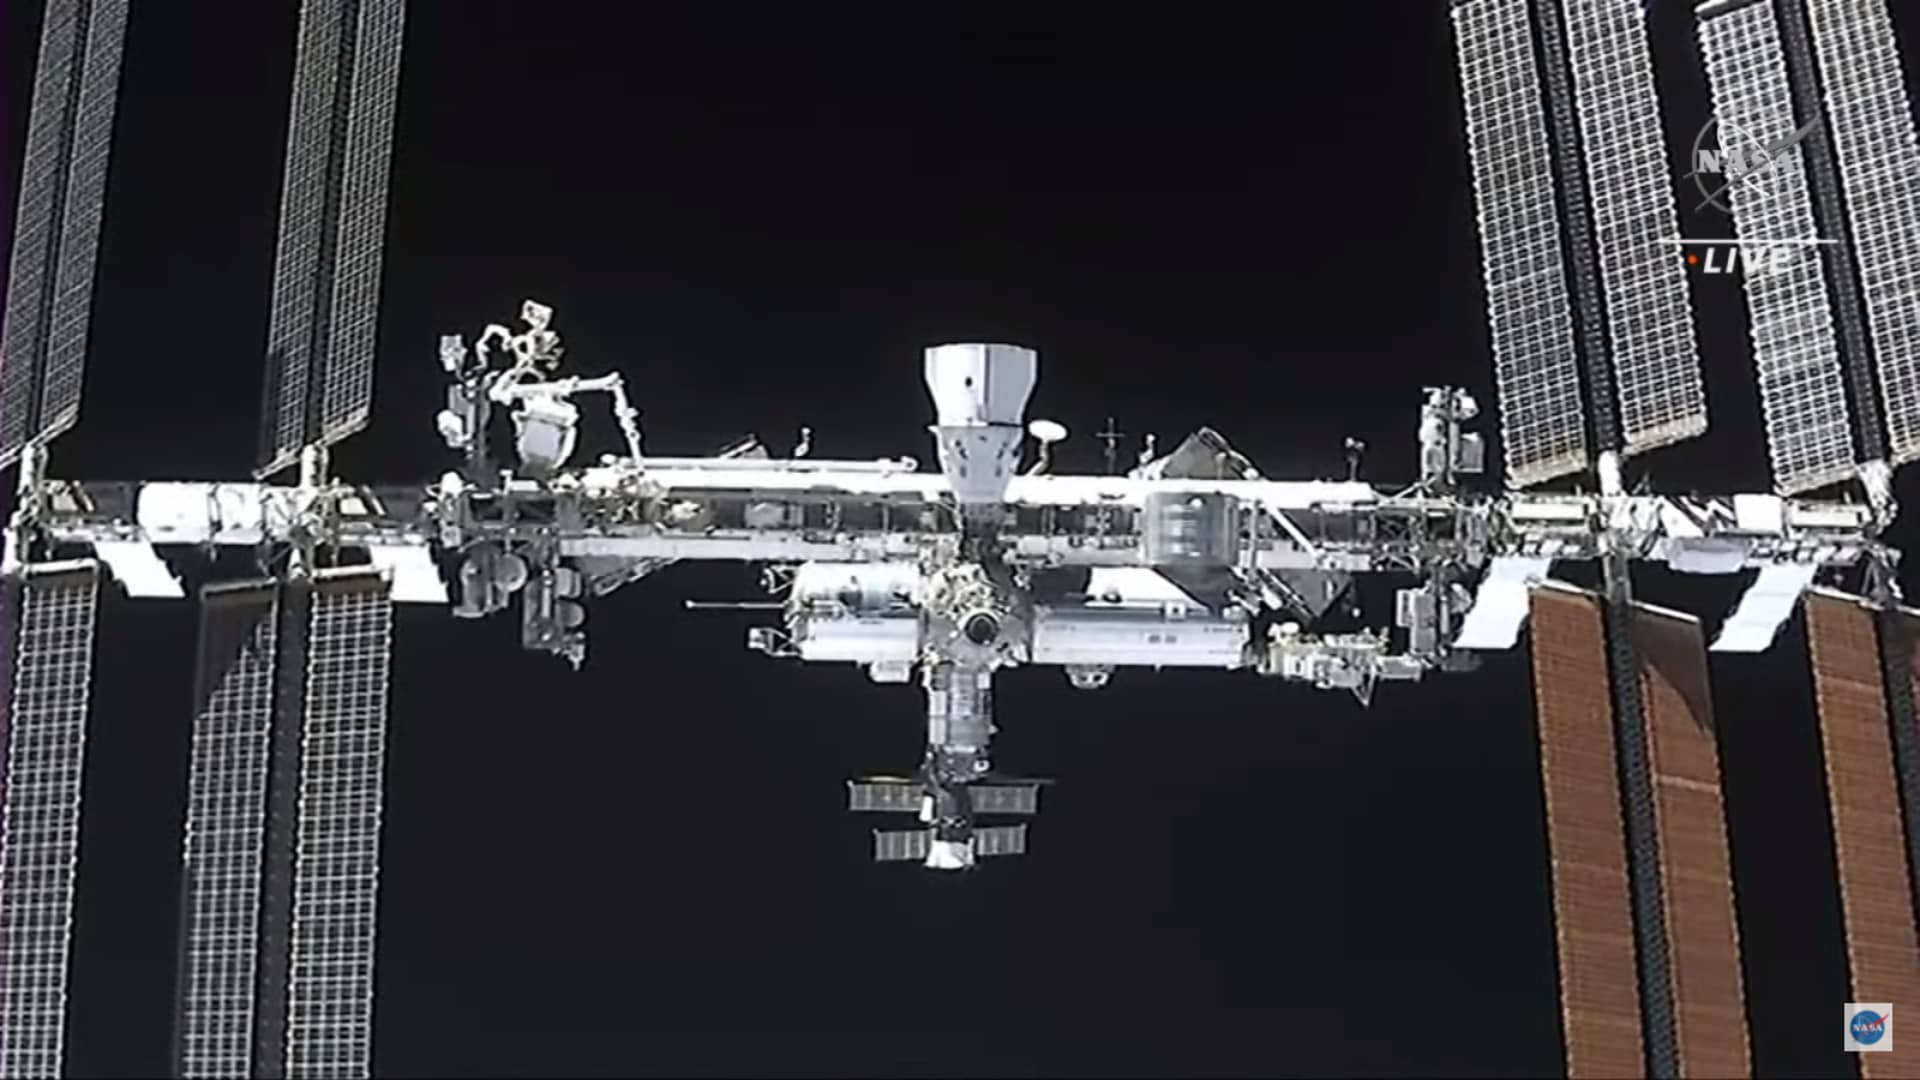 The view from SpaceX's Crew Dragon spacecraft Endeavour of the International Space Station, as well as the company's Crew Dragon spacecraft Resilience, as the capsule approached to dock on April 24, 2021.